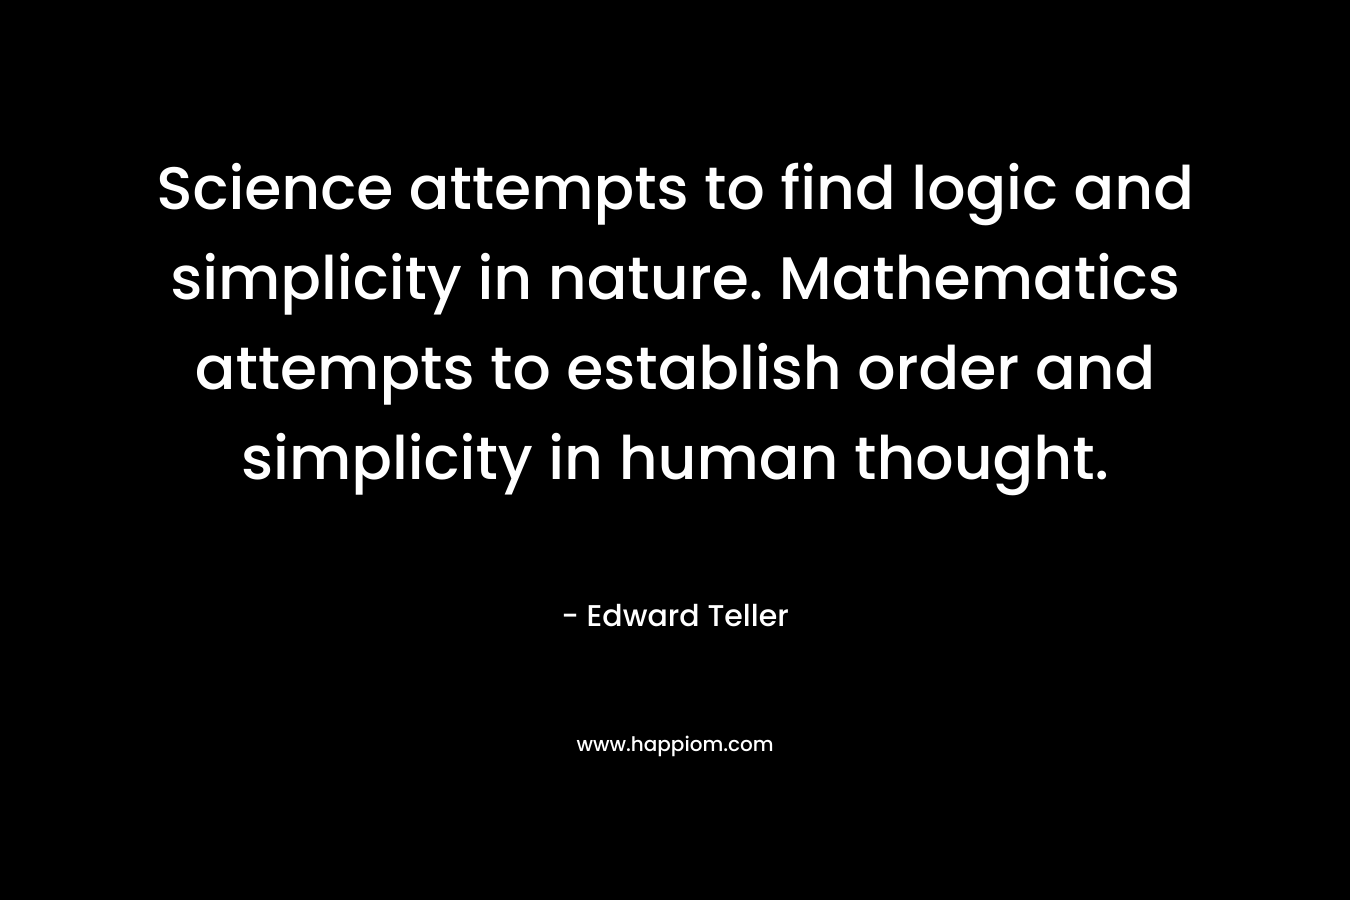 Science attempts to find logic and simplicity in nature. Mathematics attempts to establish order and simplicity in human thought. – Edward Teller